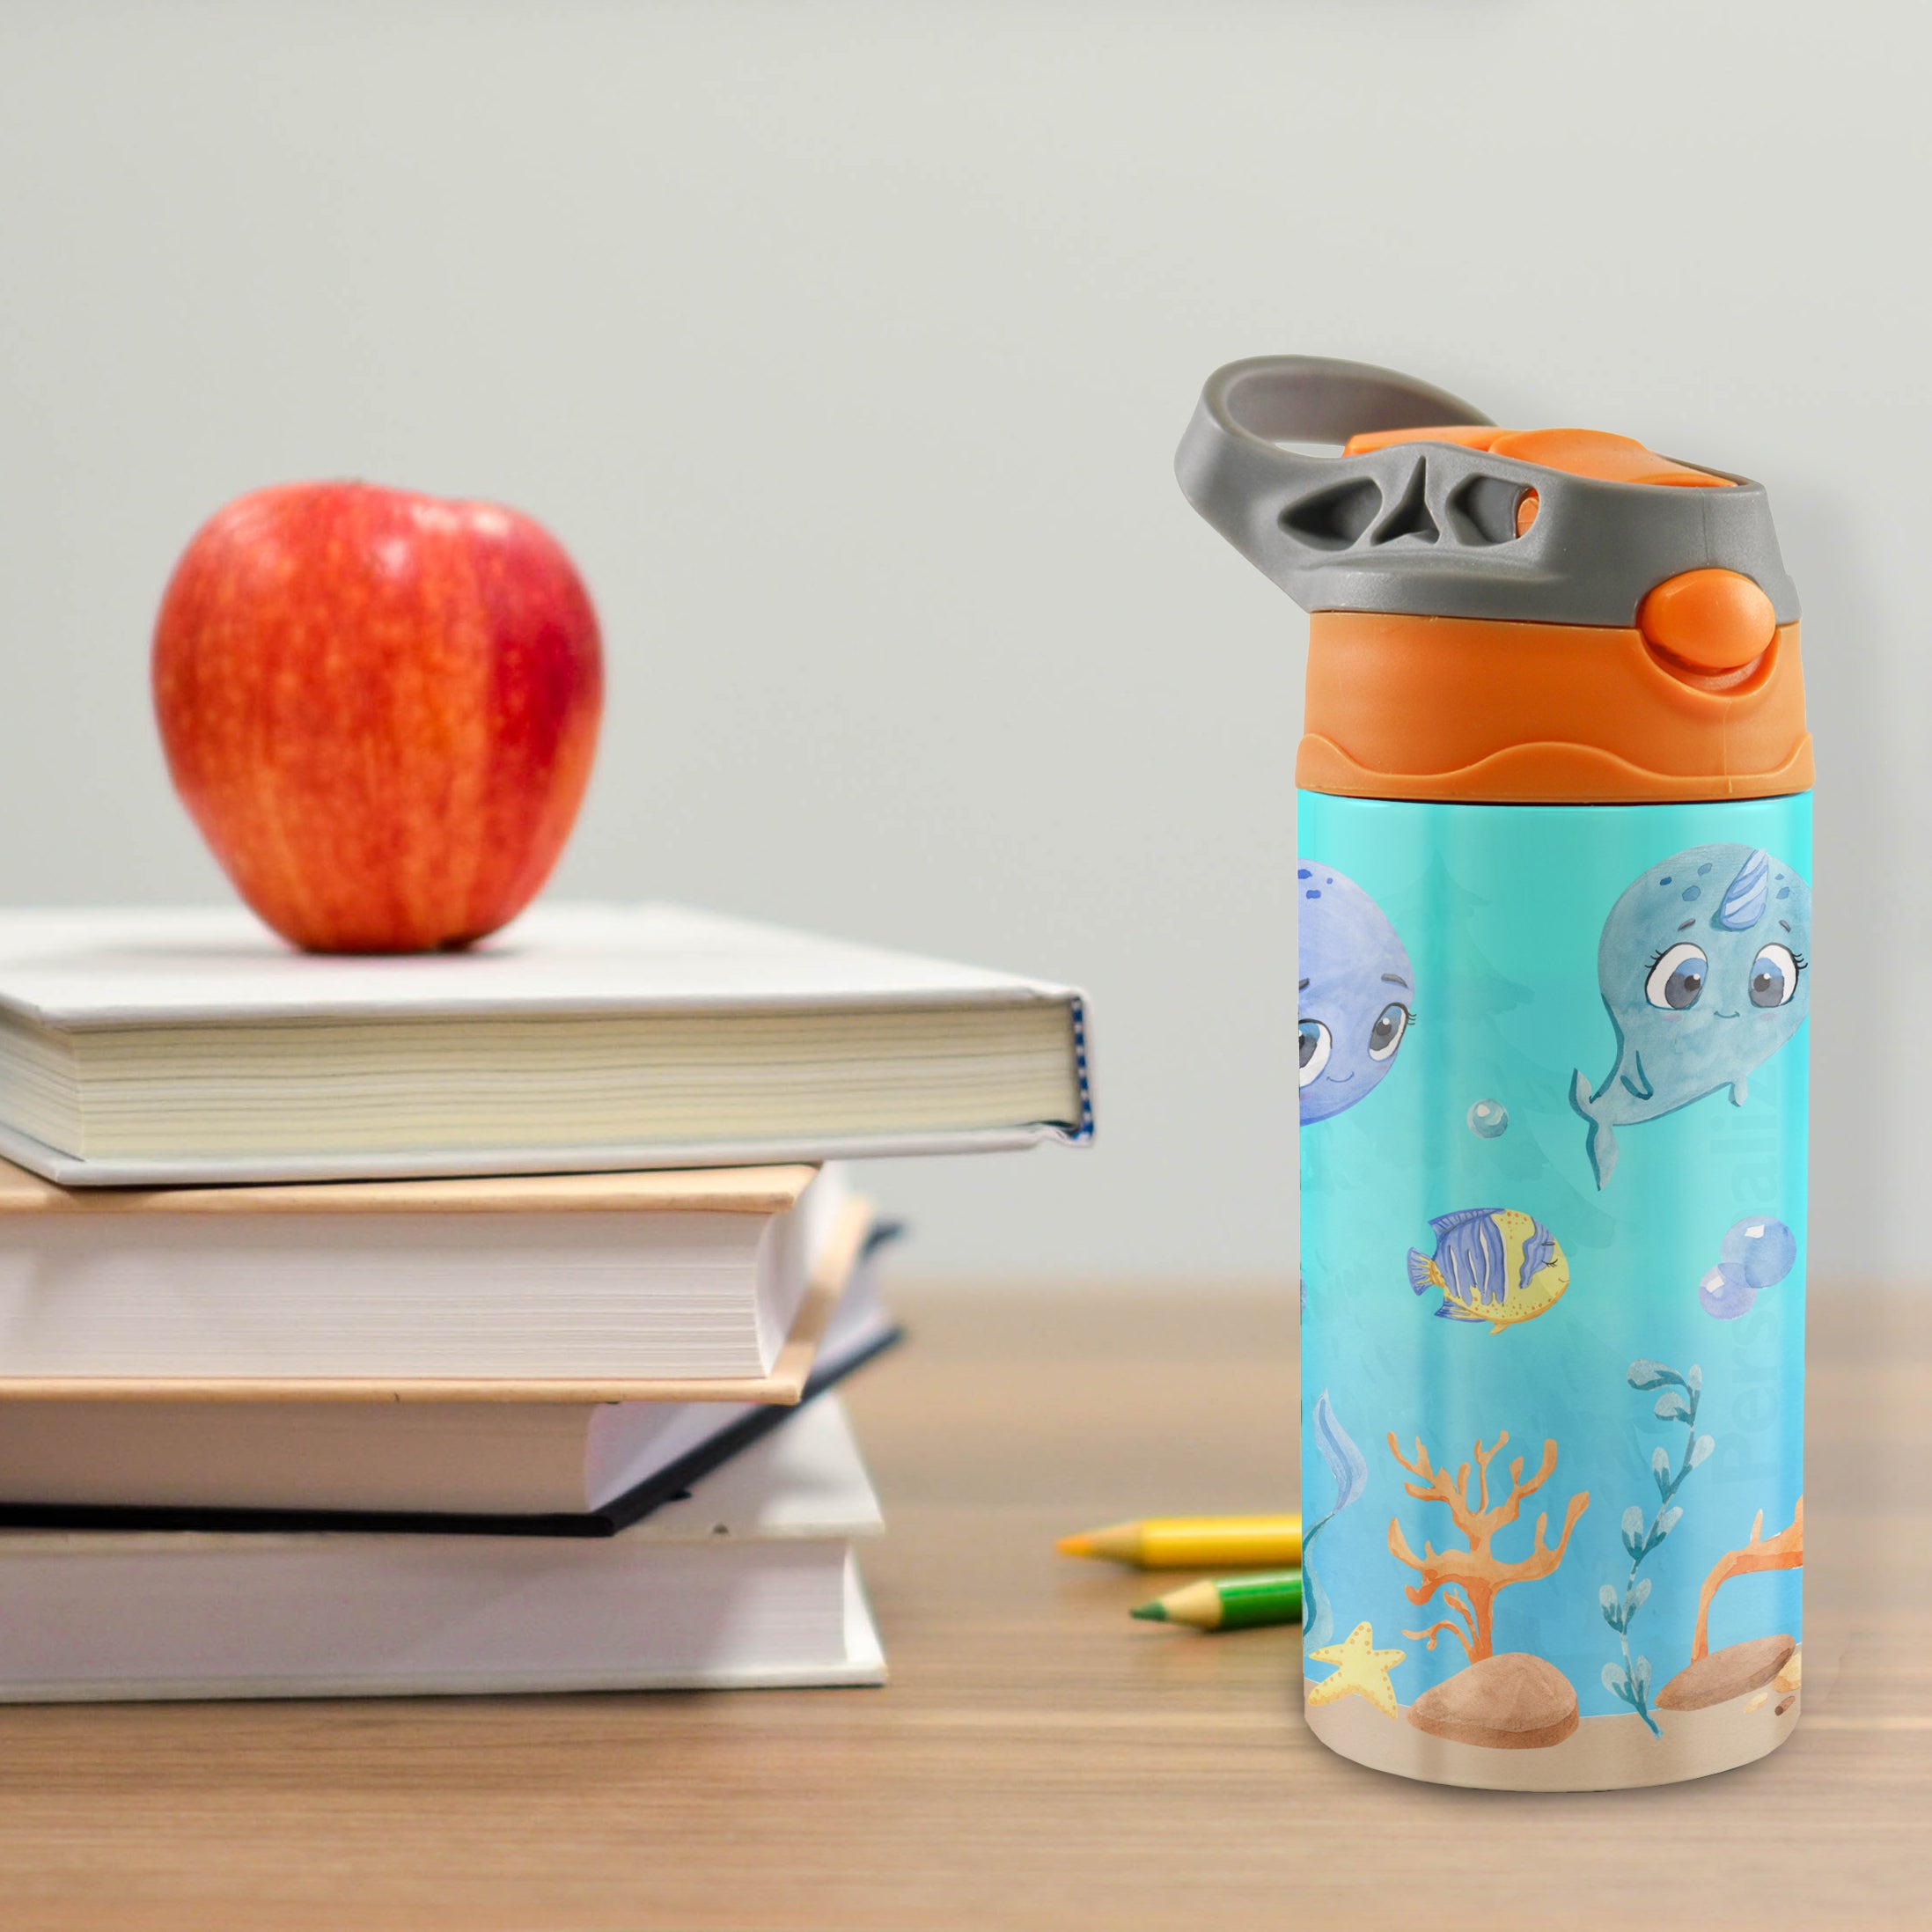 Trend Setters Original (Sea Life - Personalize with Name) 12 oz Stainless Steel Water Bottle with Orange and Grey Lid